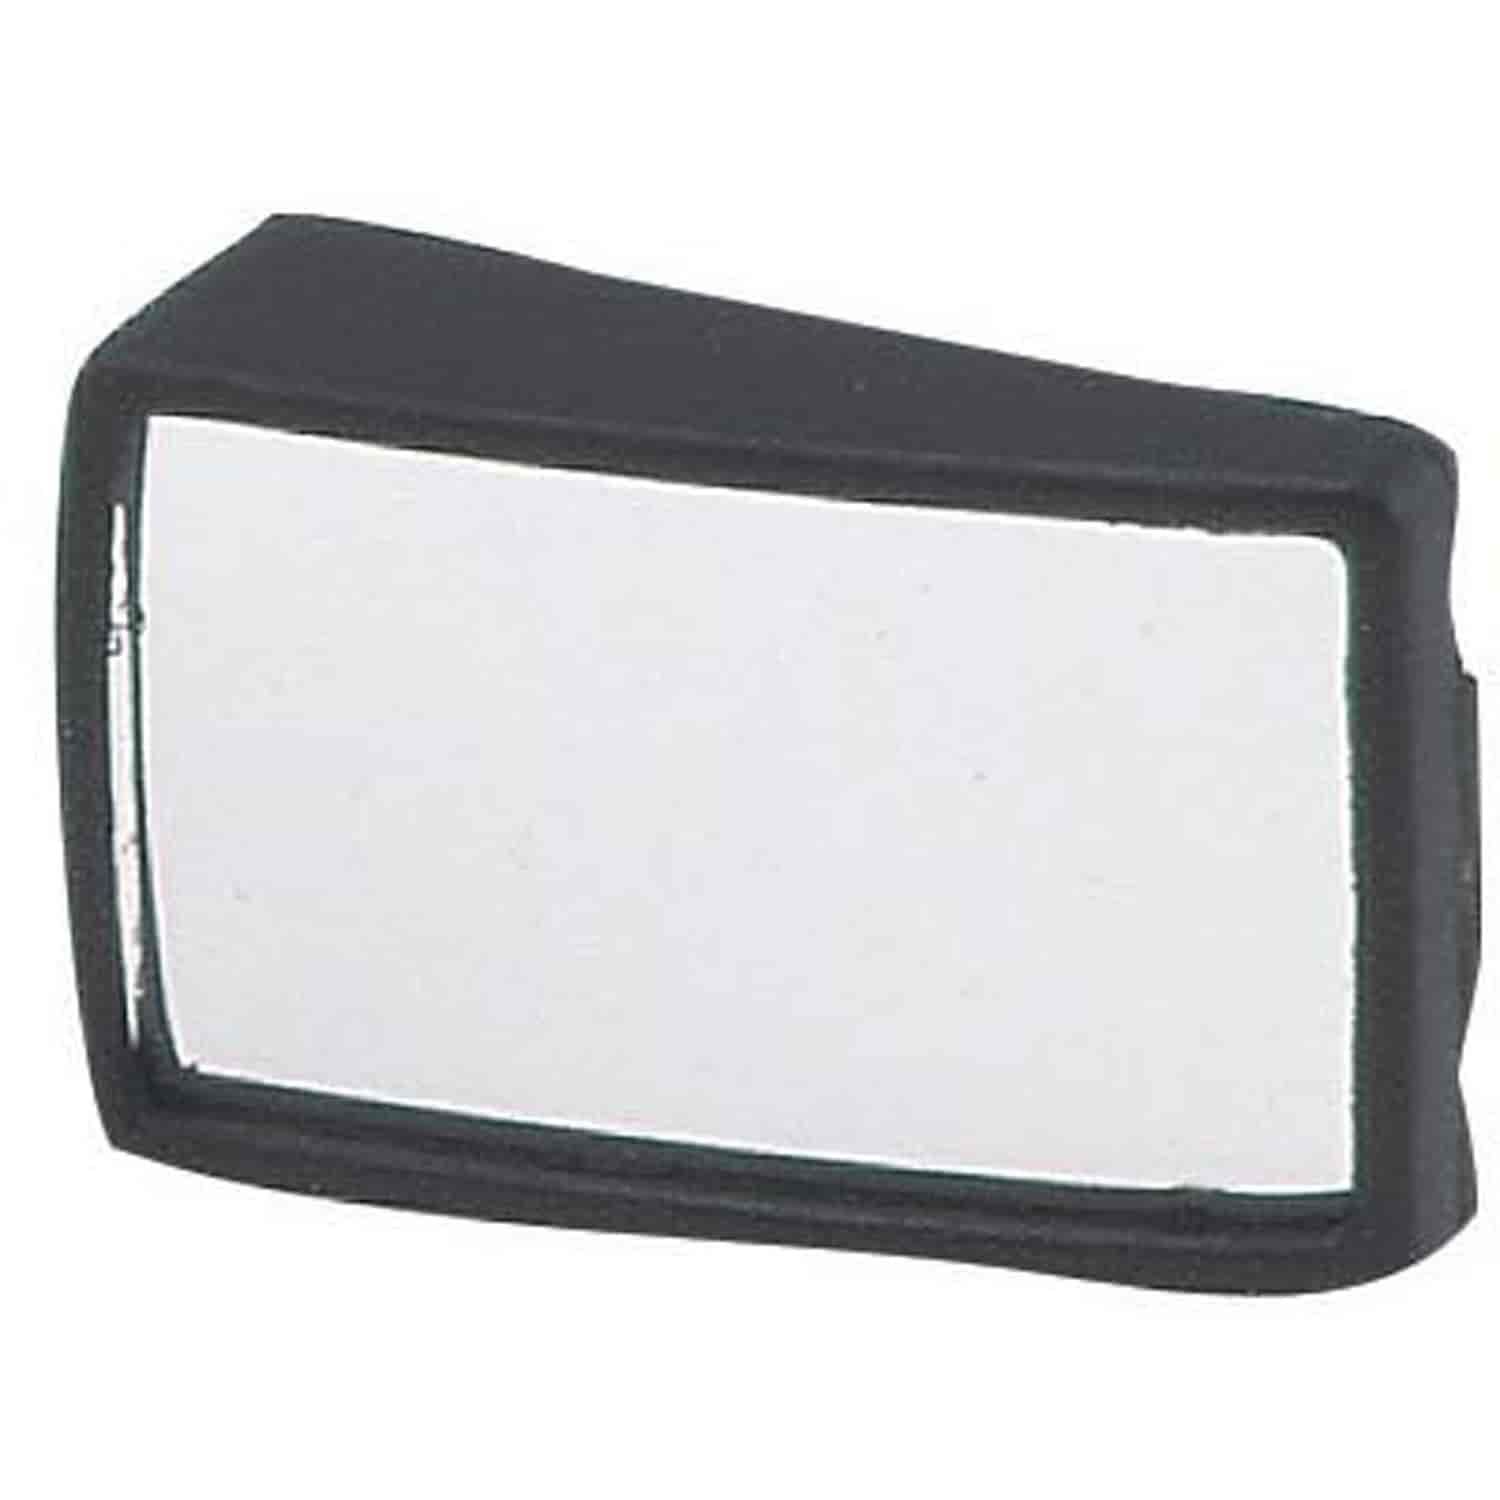 Stick-On Wedge Mirror This mirror is 2-1/2 inches wide and 1-7/16 inches tall.